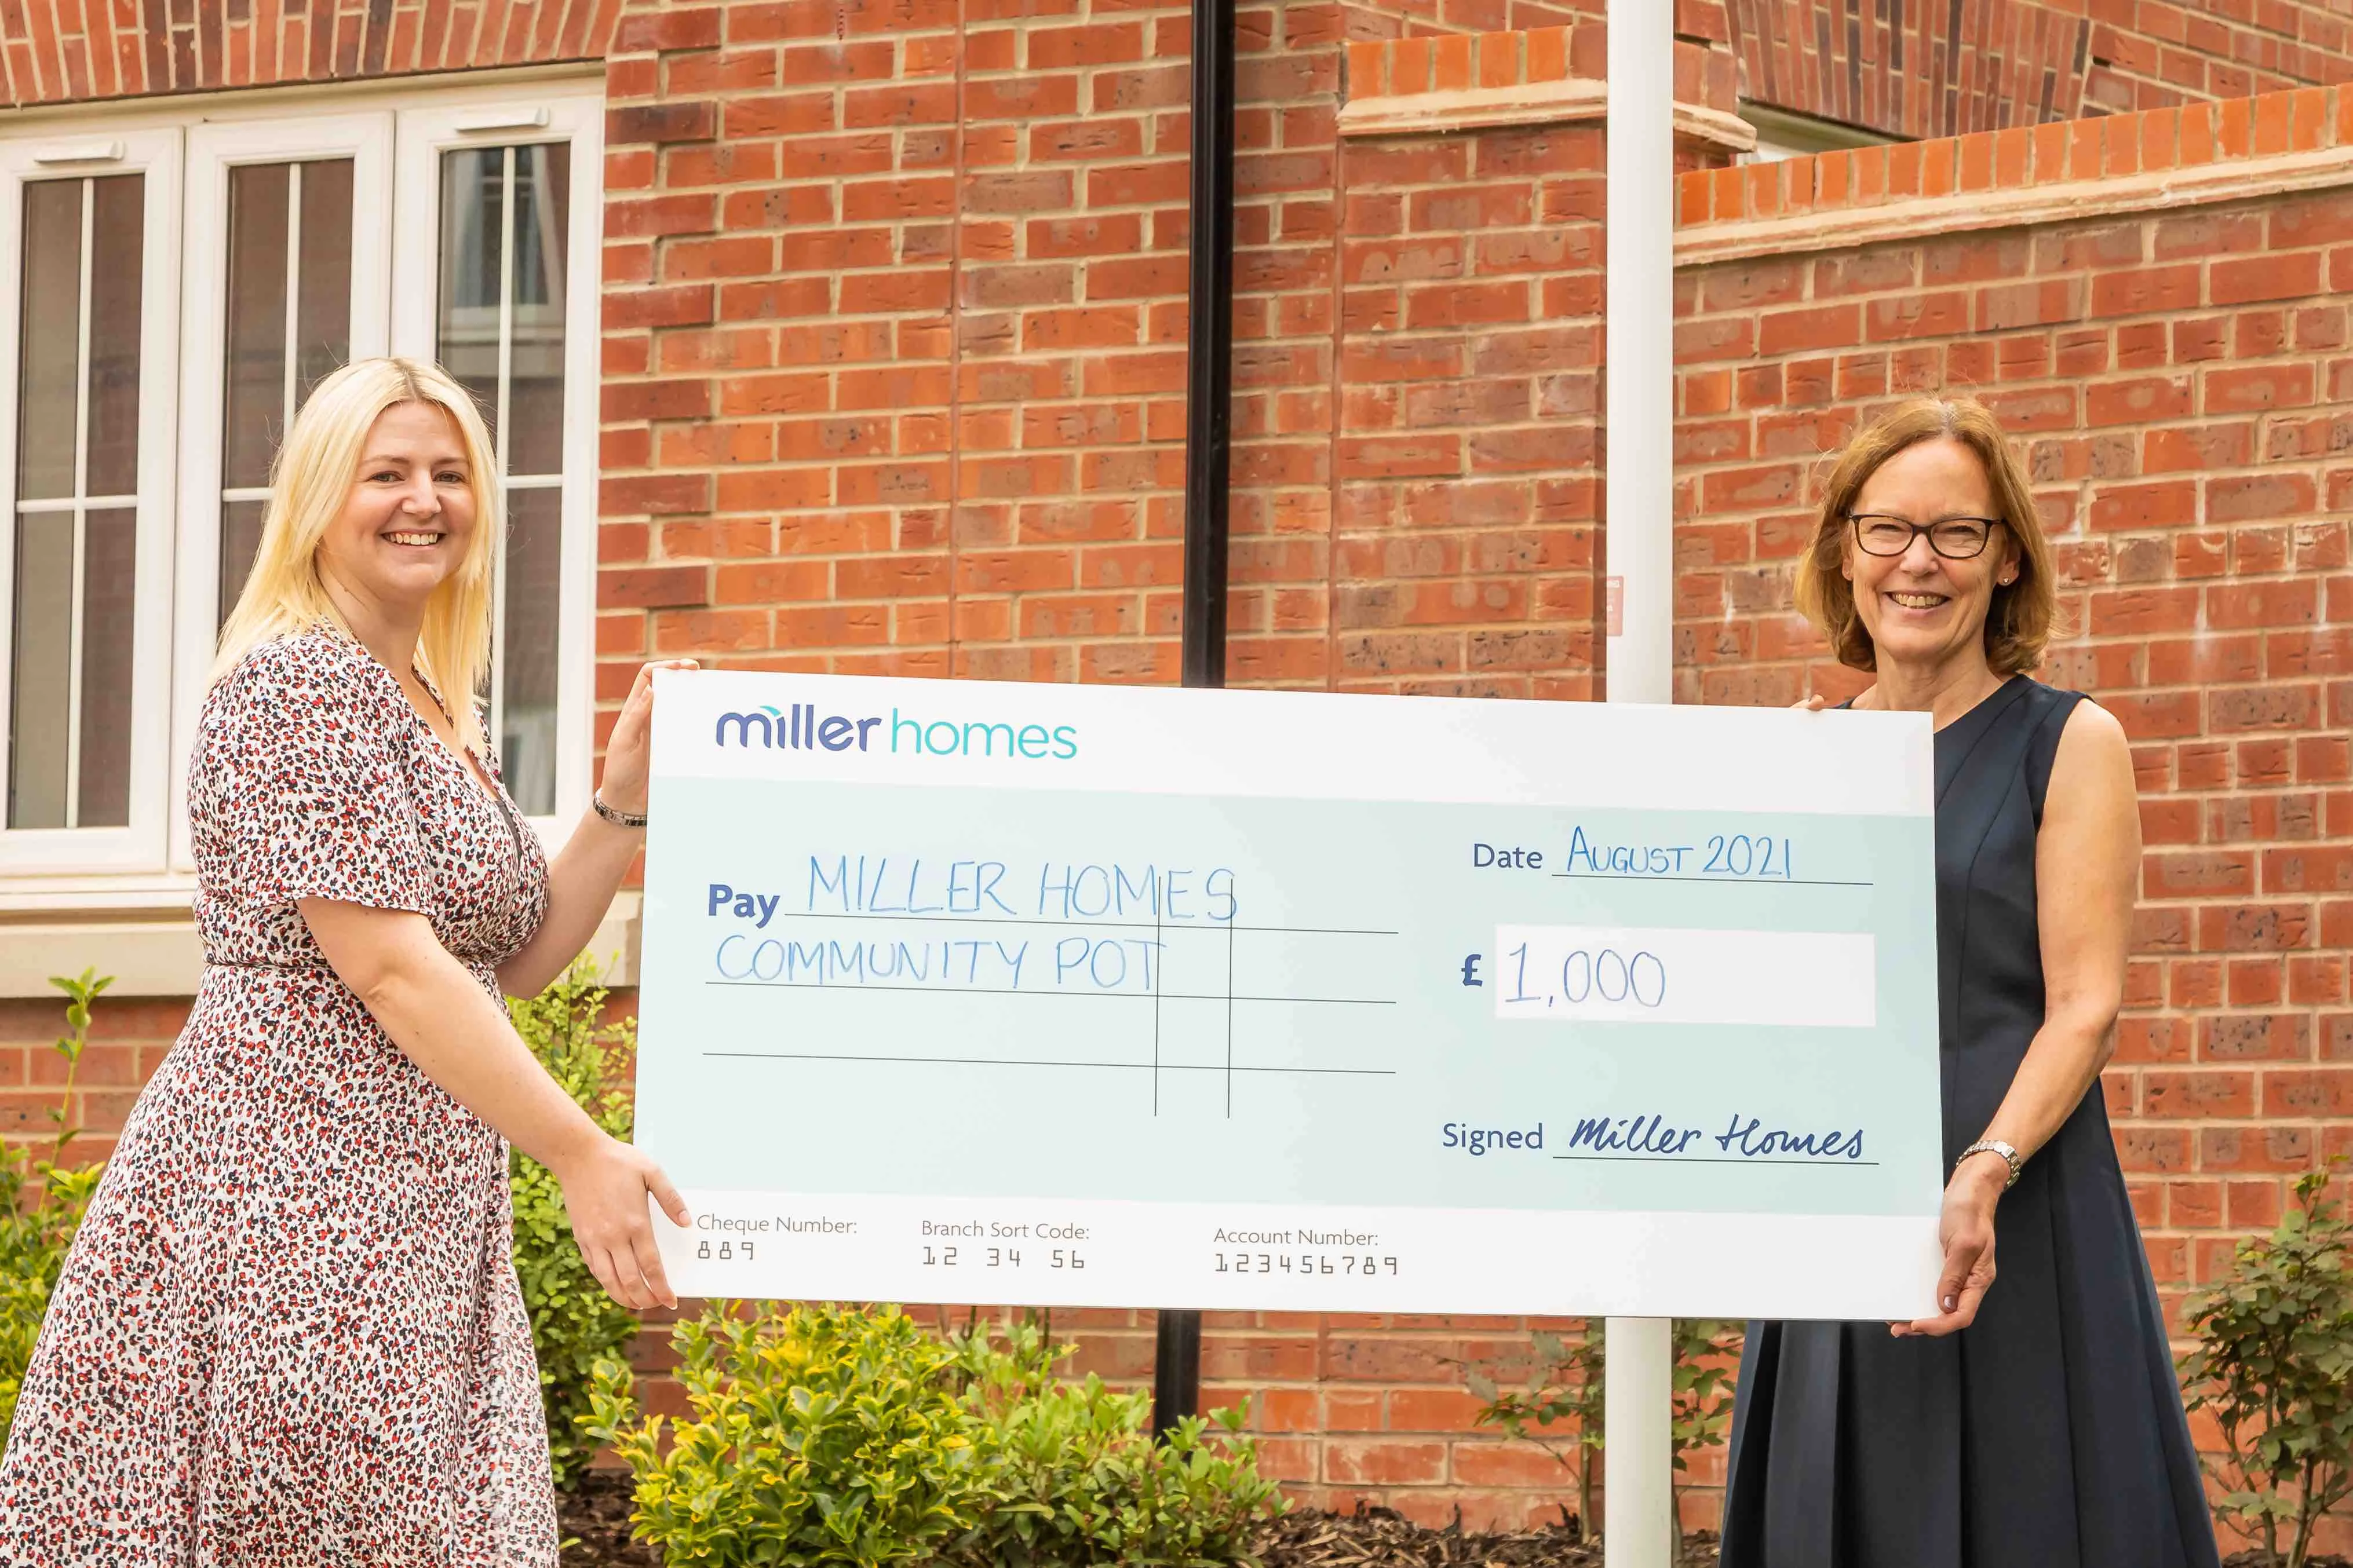 L-R Maggie White, sales manager at Miller Homes presenting the donation to Janette Butler, partnership development manager at Walton Charity